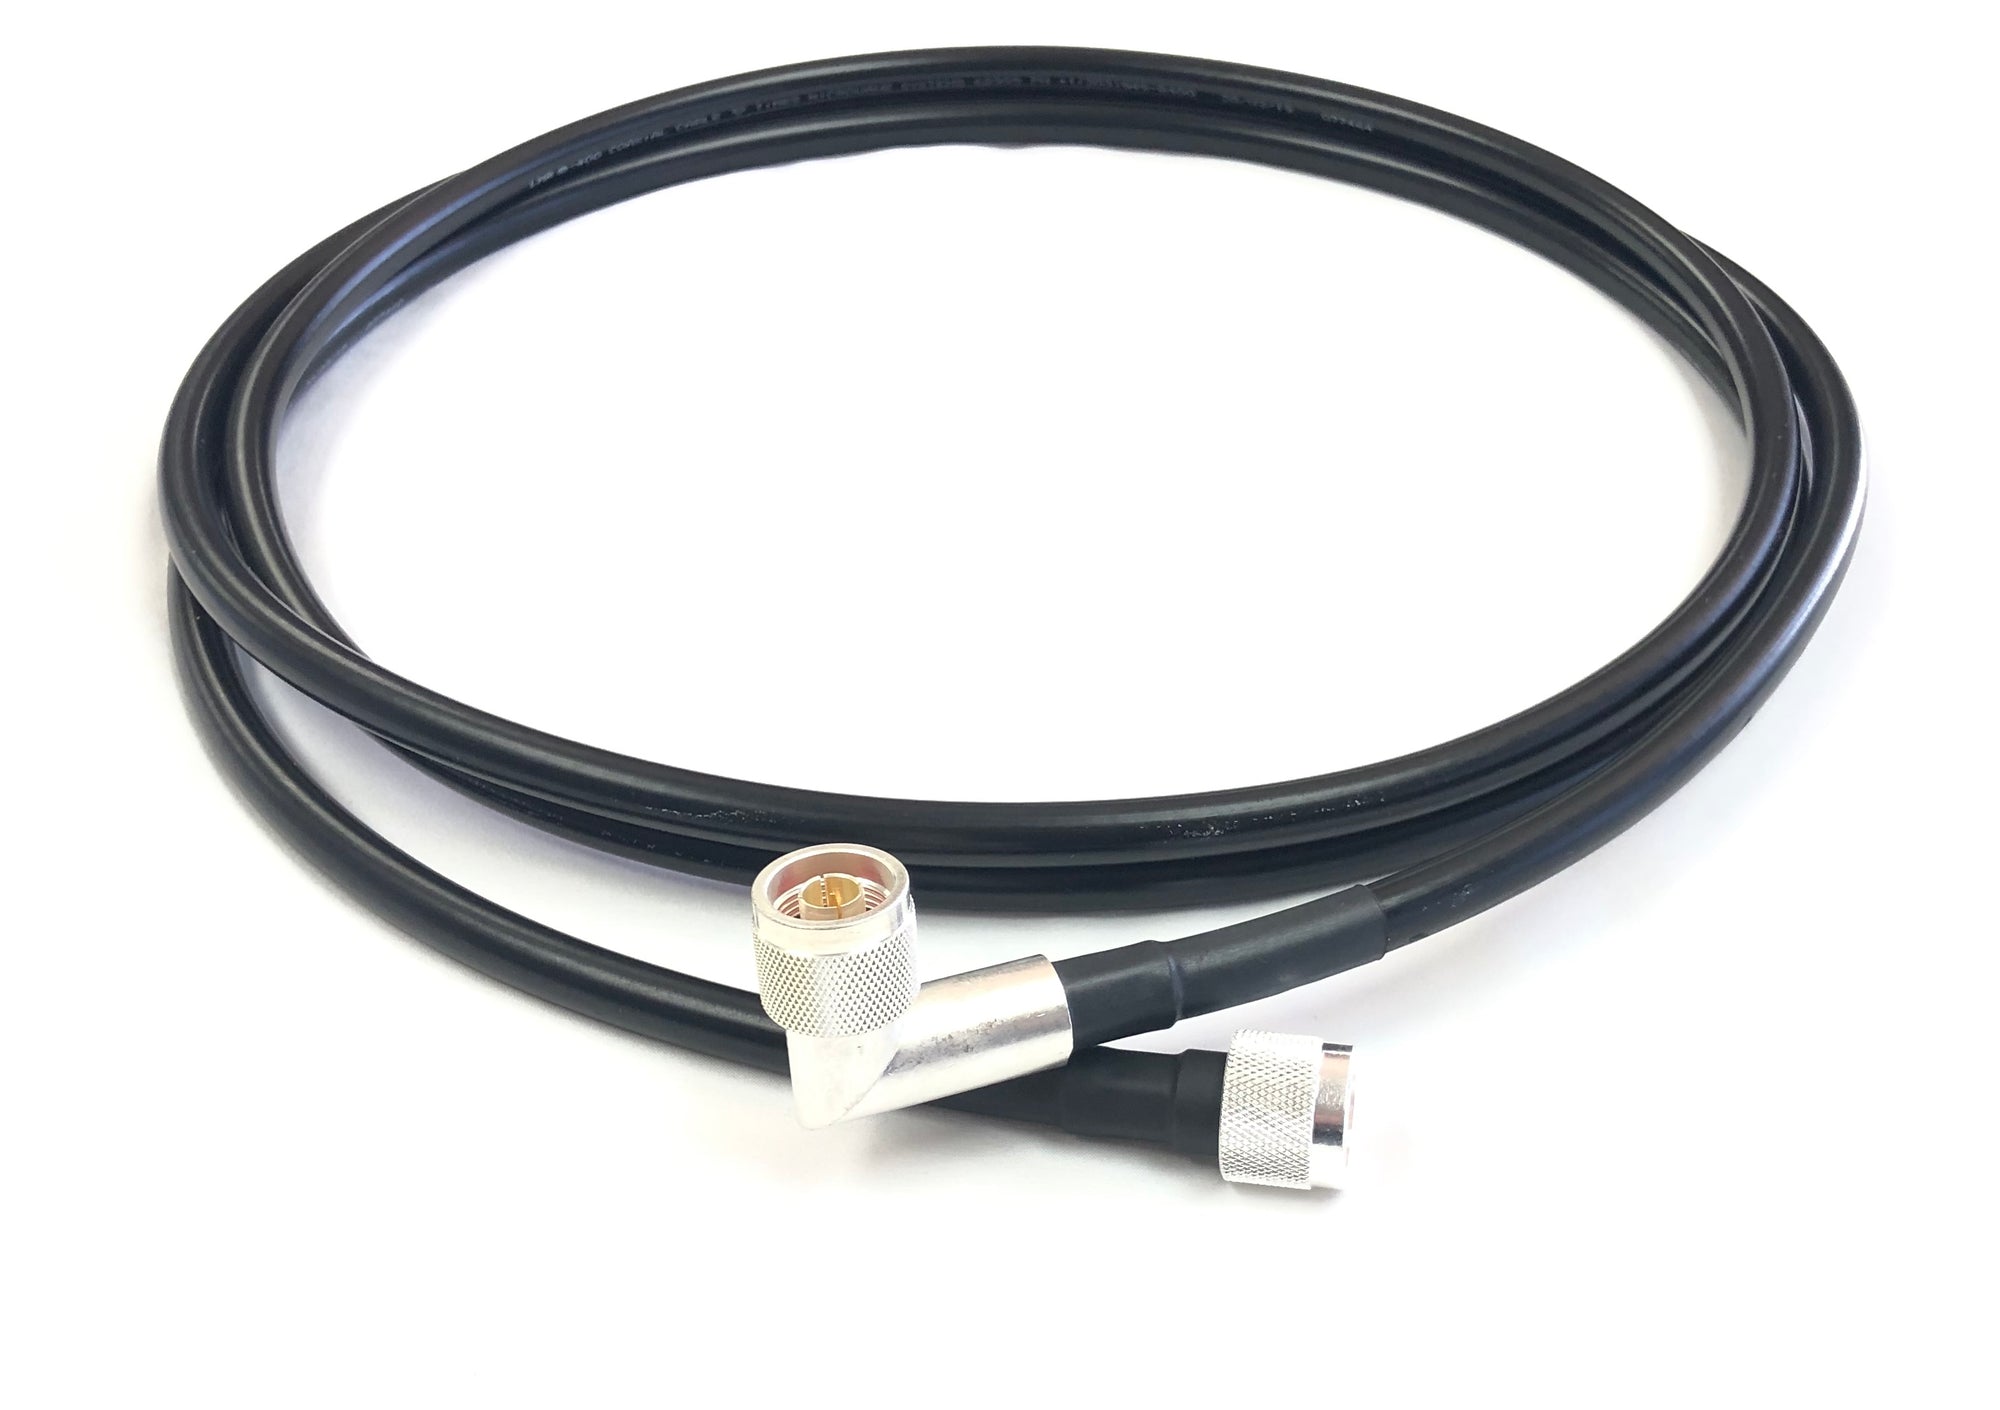 N Male to N Male Right Angle Times Microwave LMR-400 50 Ohm Cable